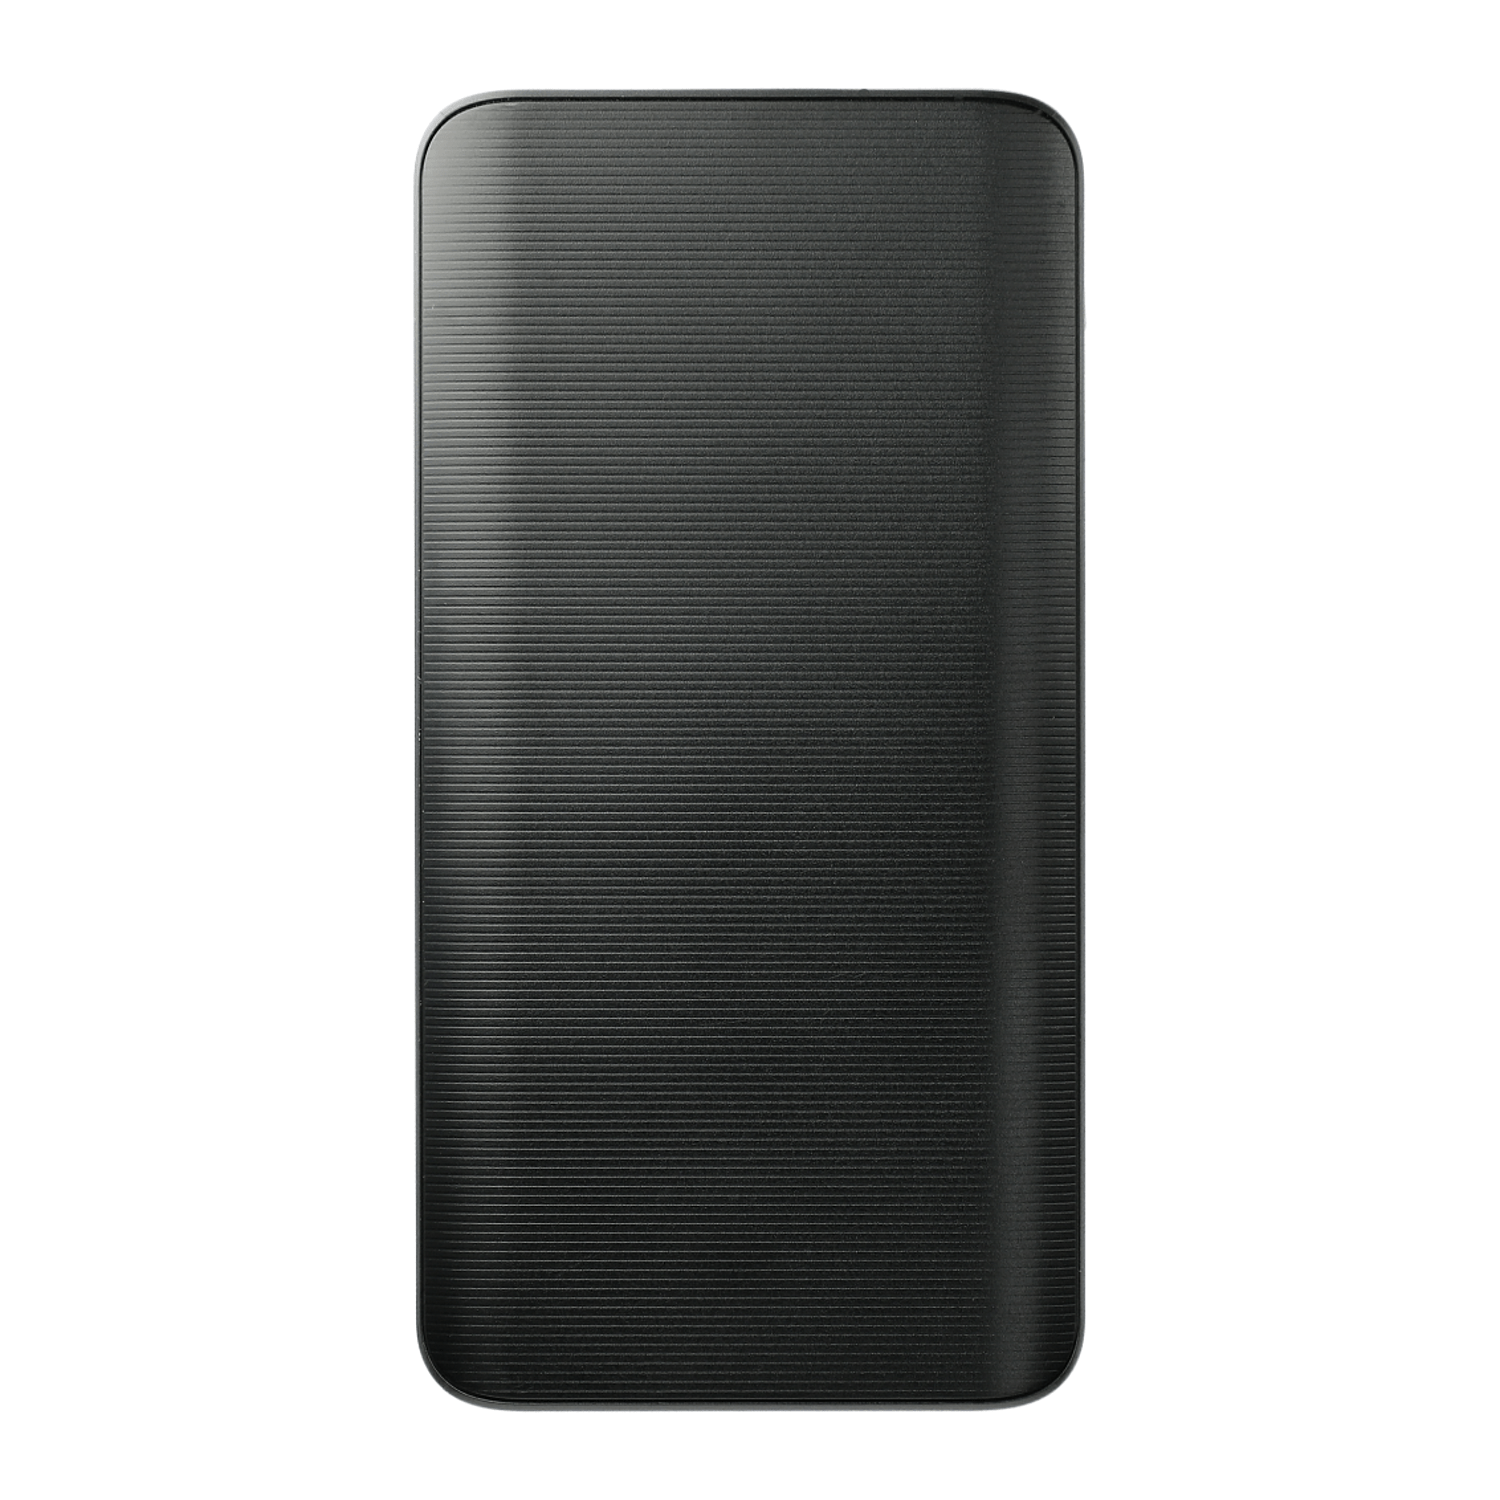 mophie Accessories One Size / Black mophie - Power Boost 10,000 mAh Power Bank